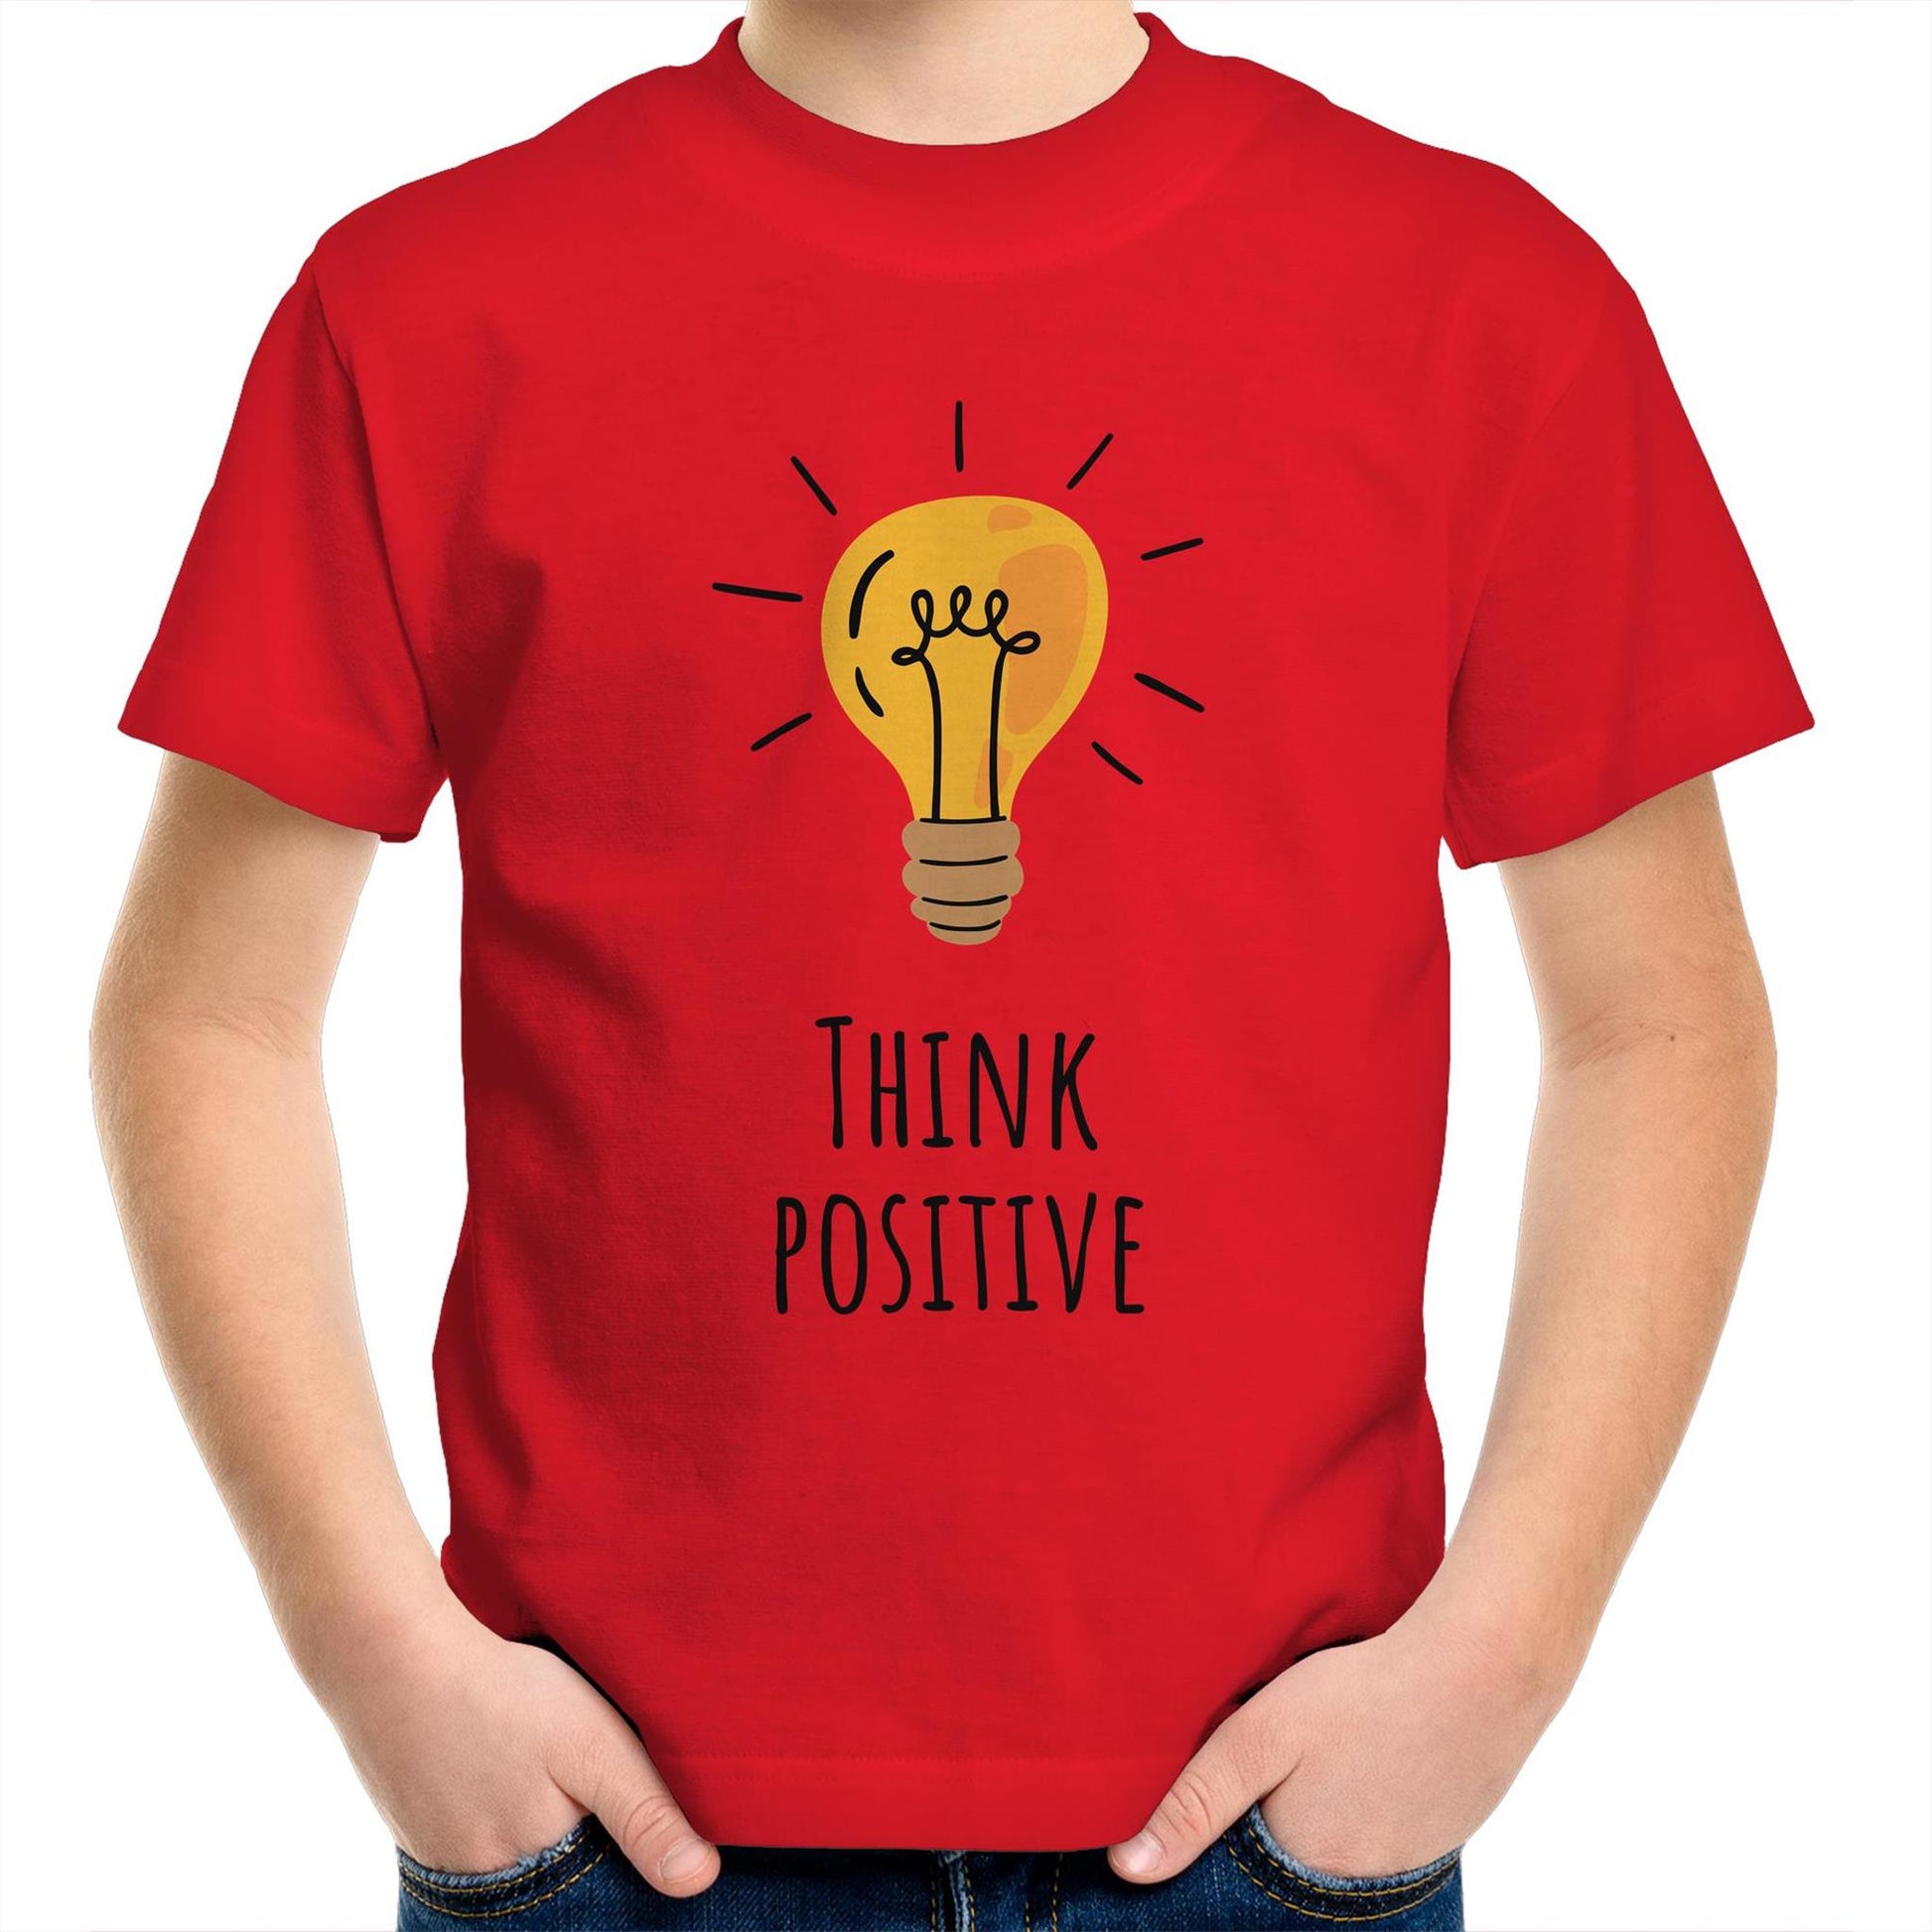 Think Positive - Kids Youth Crew T-Shirt Red Kids Youth T-shirt